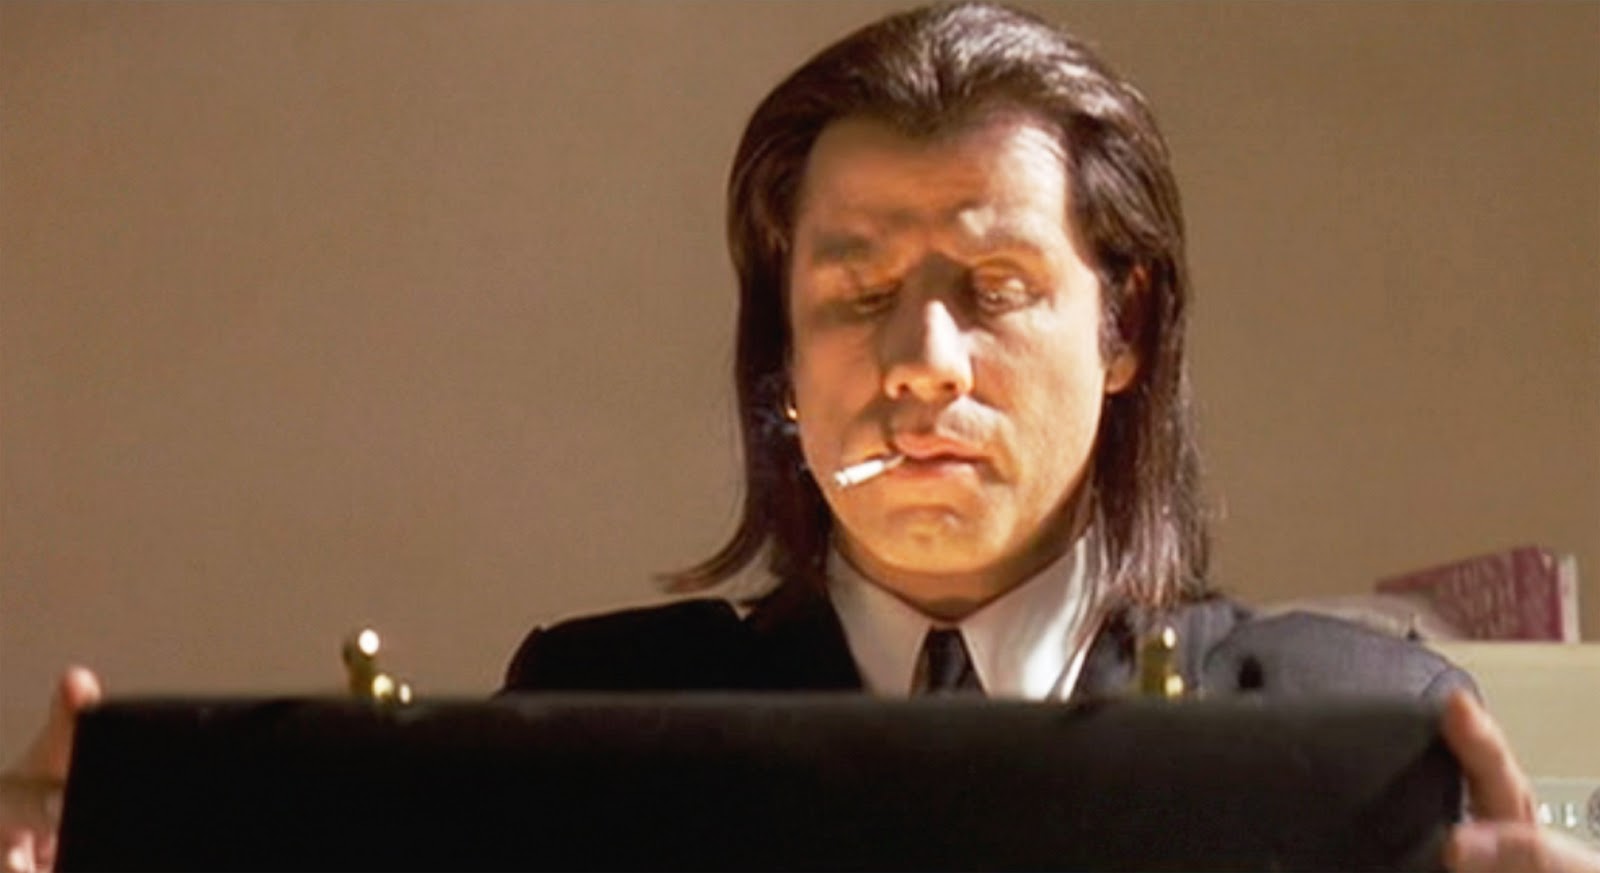 Vincent Vega just opened the suitcase - Pulp Fiction